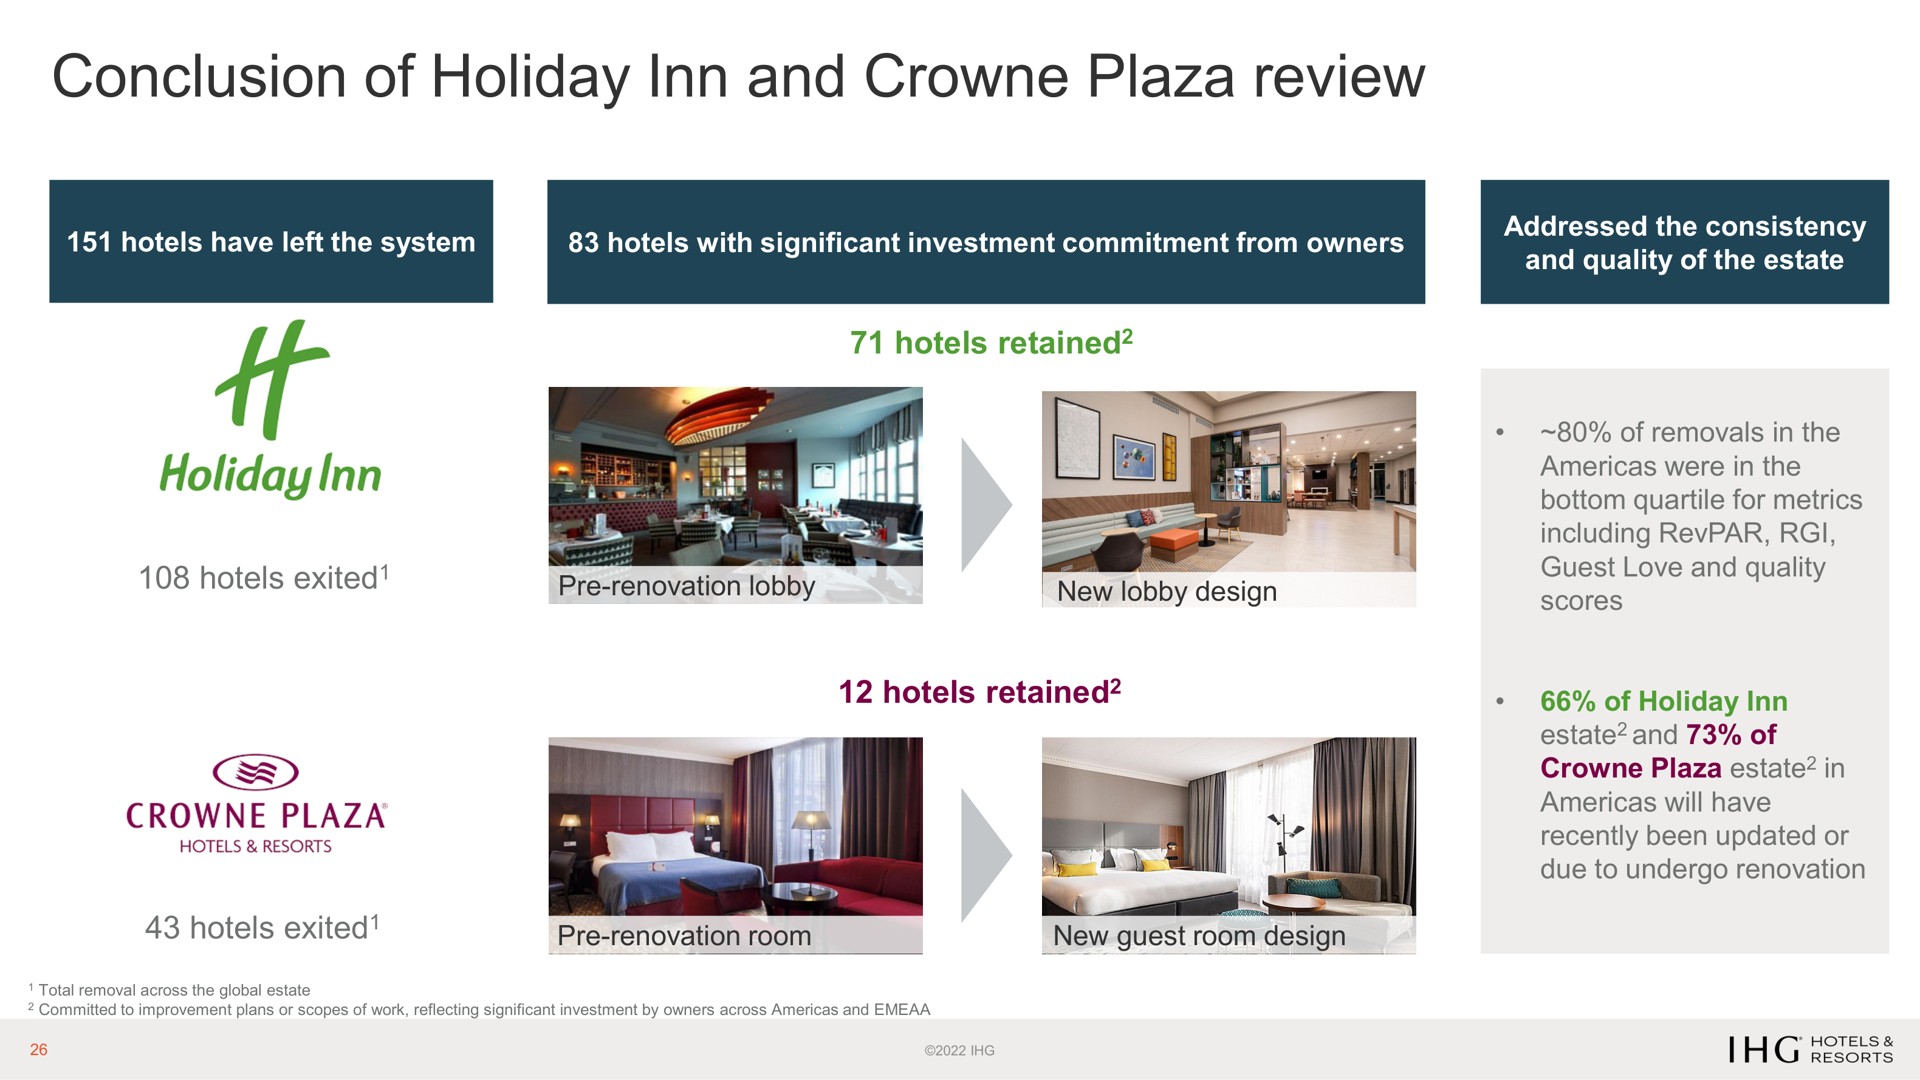 conclusion of holiday inn and plaza review | IHG Hotels